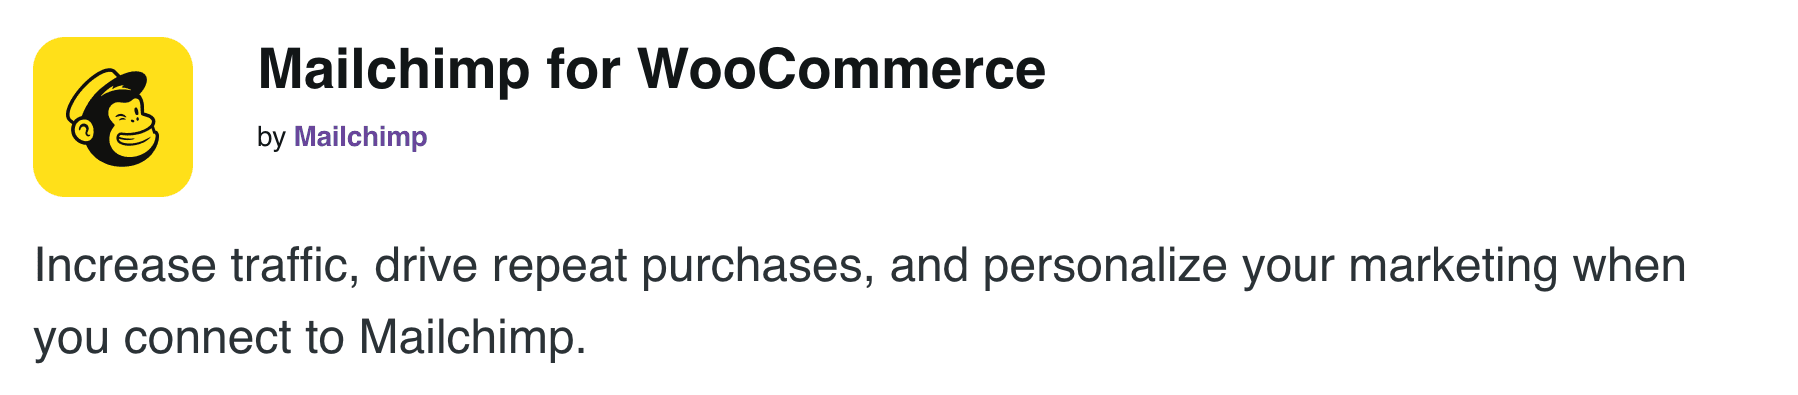 woocommerce customers to mailchimp